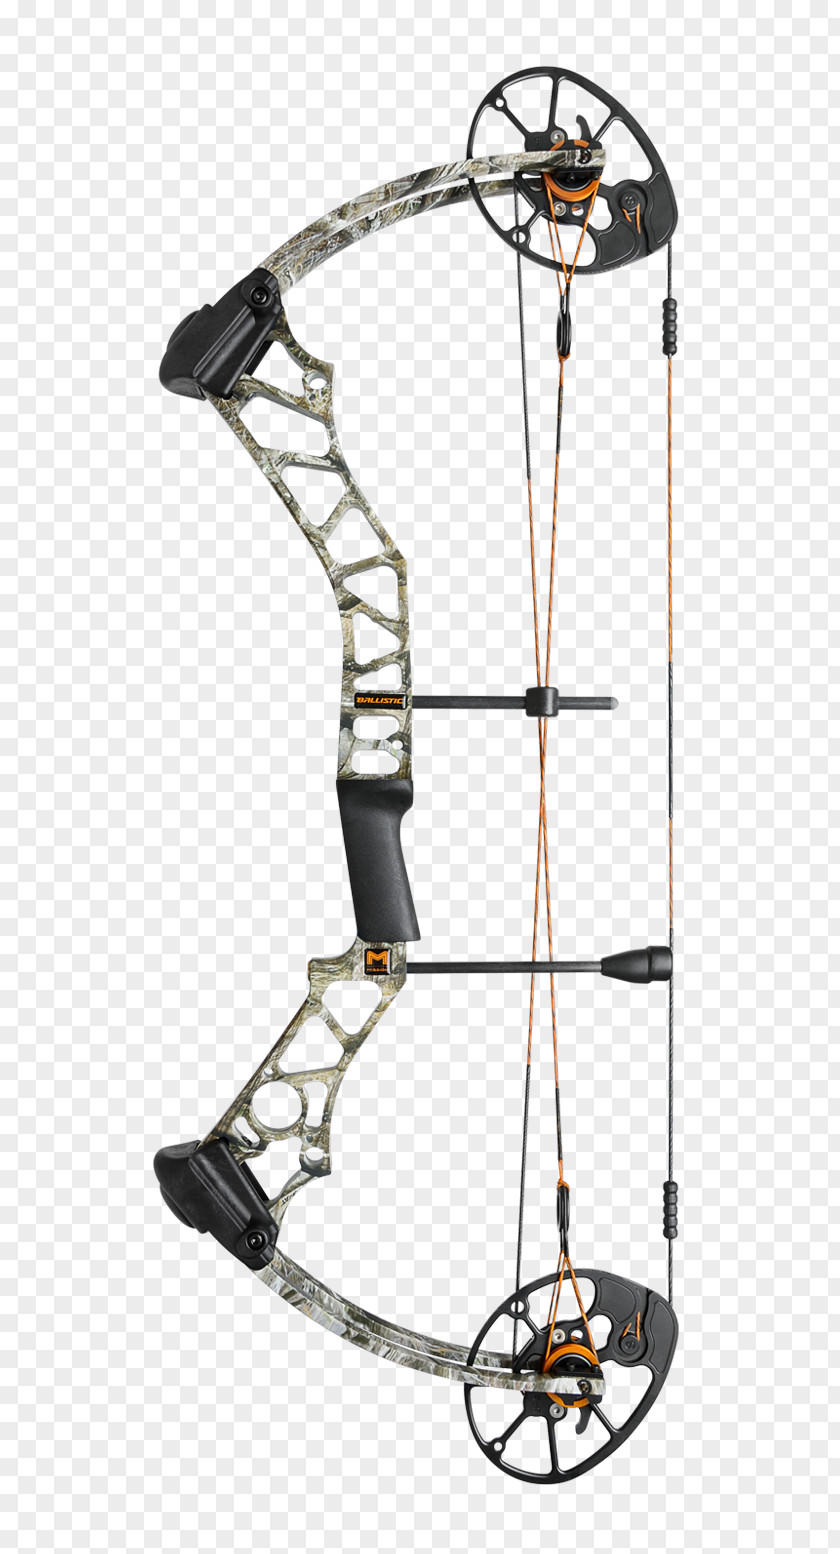 Hunting Archery Compound Bows Ballistics Bow And Arrow PNG